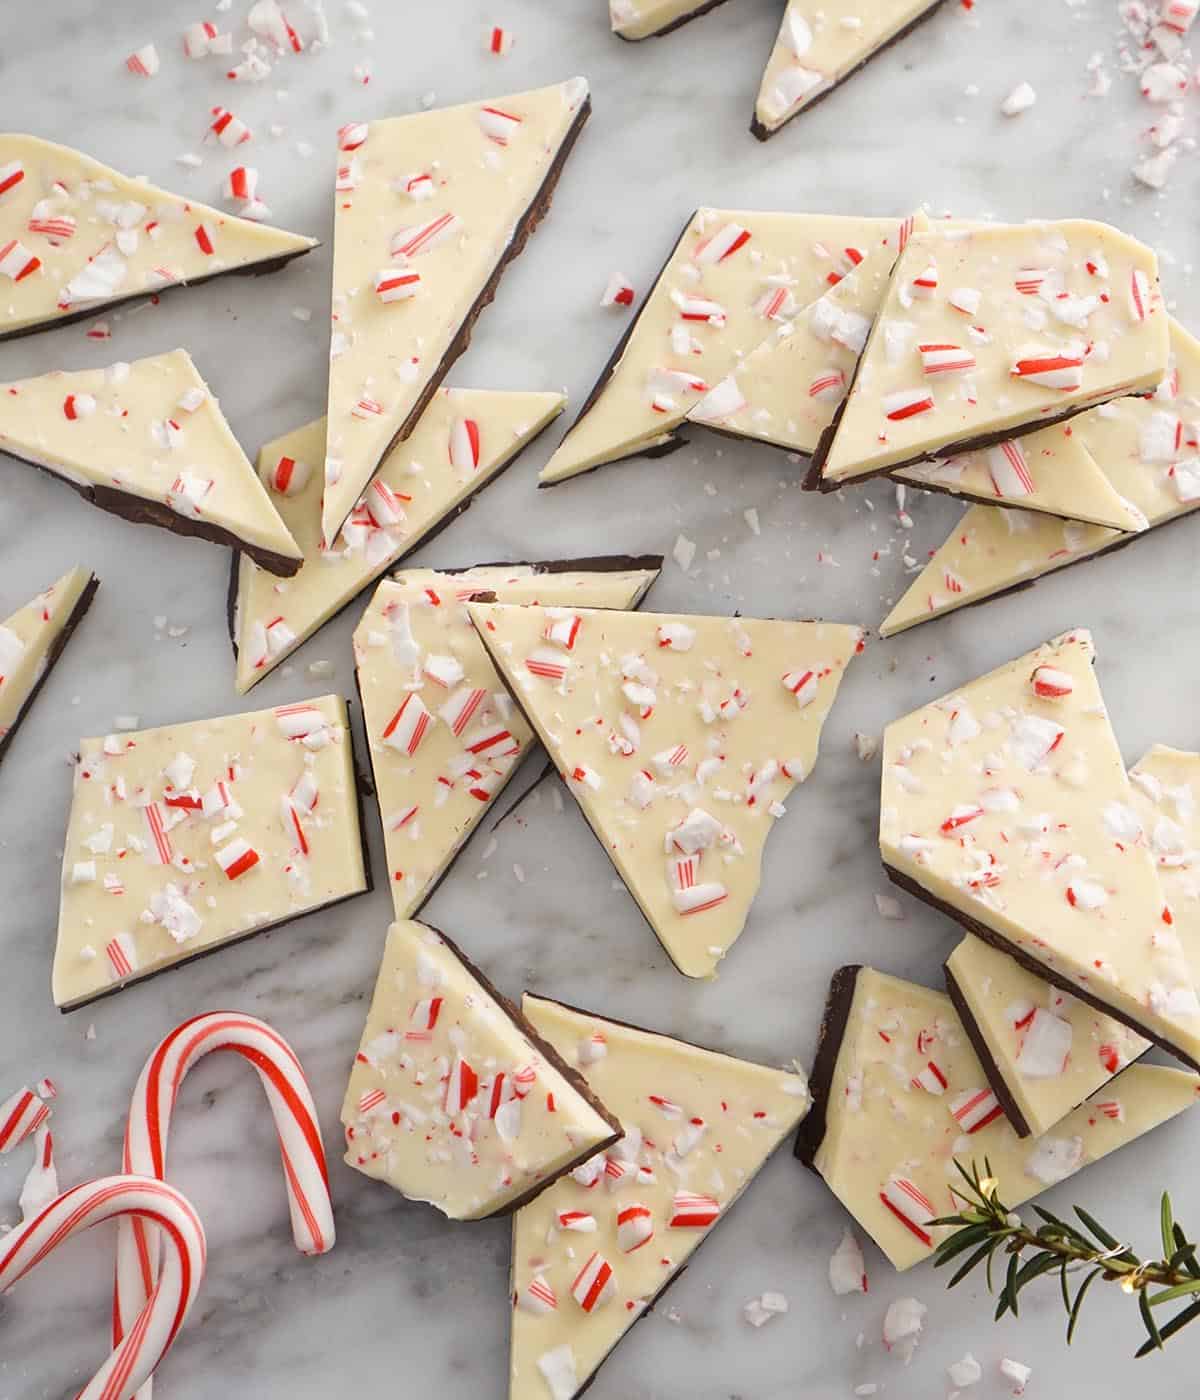 Triangular peppermint bark pieces on a marble counter. 